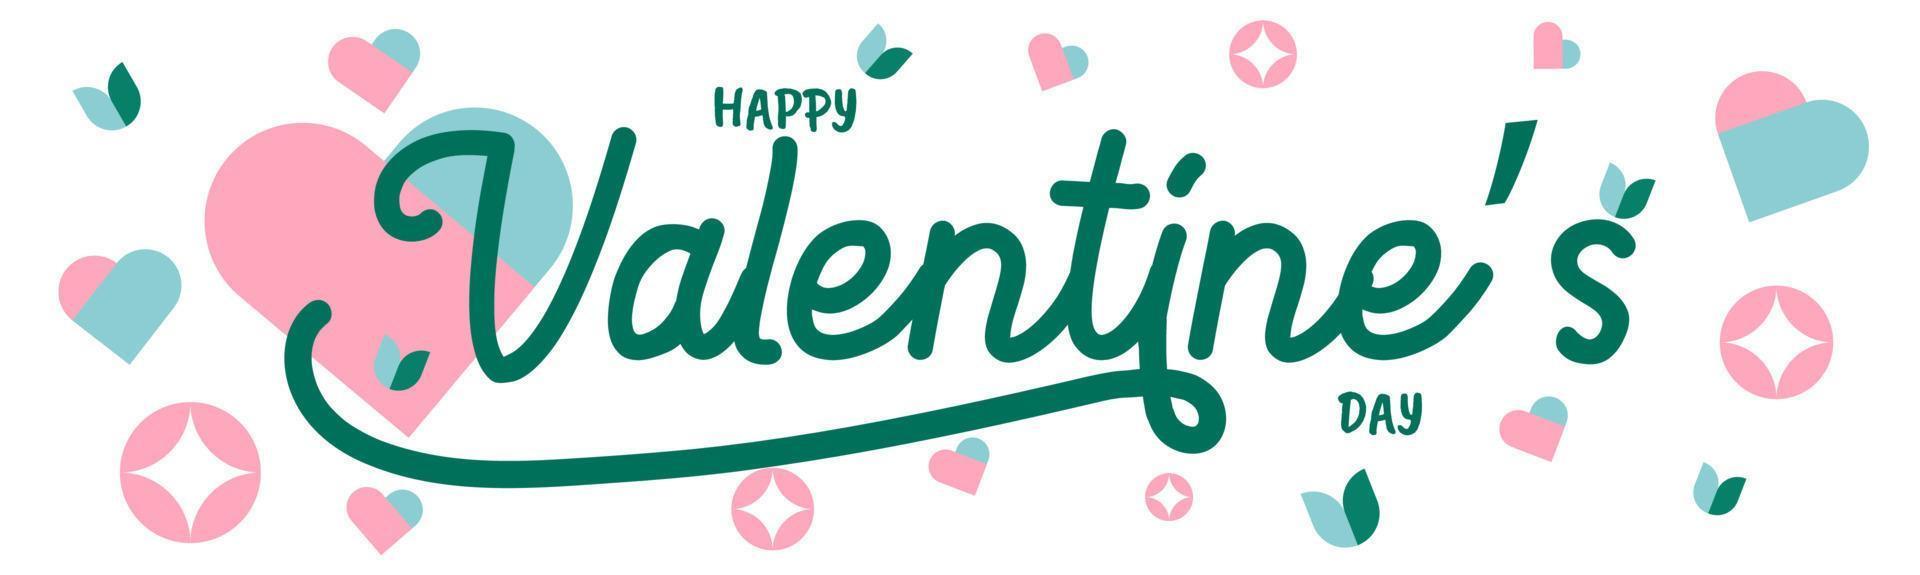 Happy Valentine's Day typography poster with handwritten calligraphic text, Valentine Design with heart shaped icon. February 14th. isolated on white background. Vector illustration